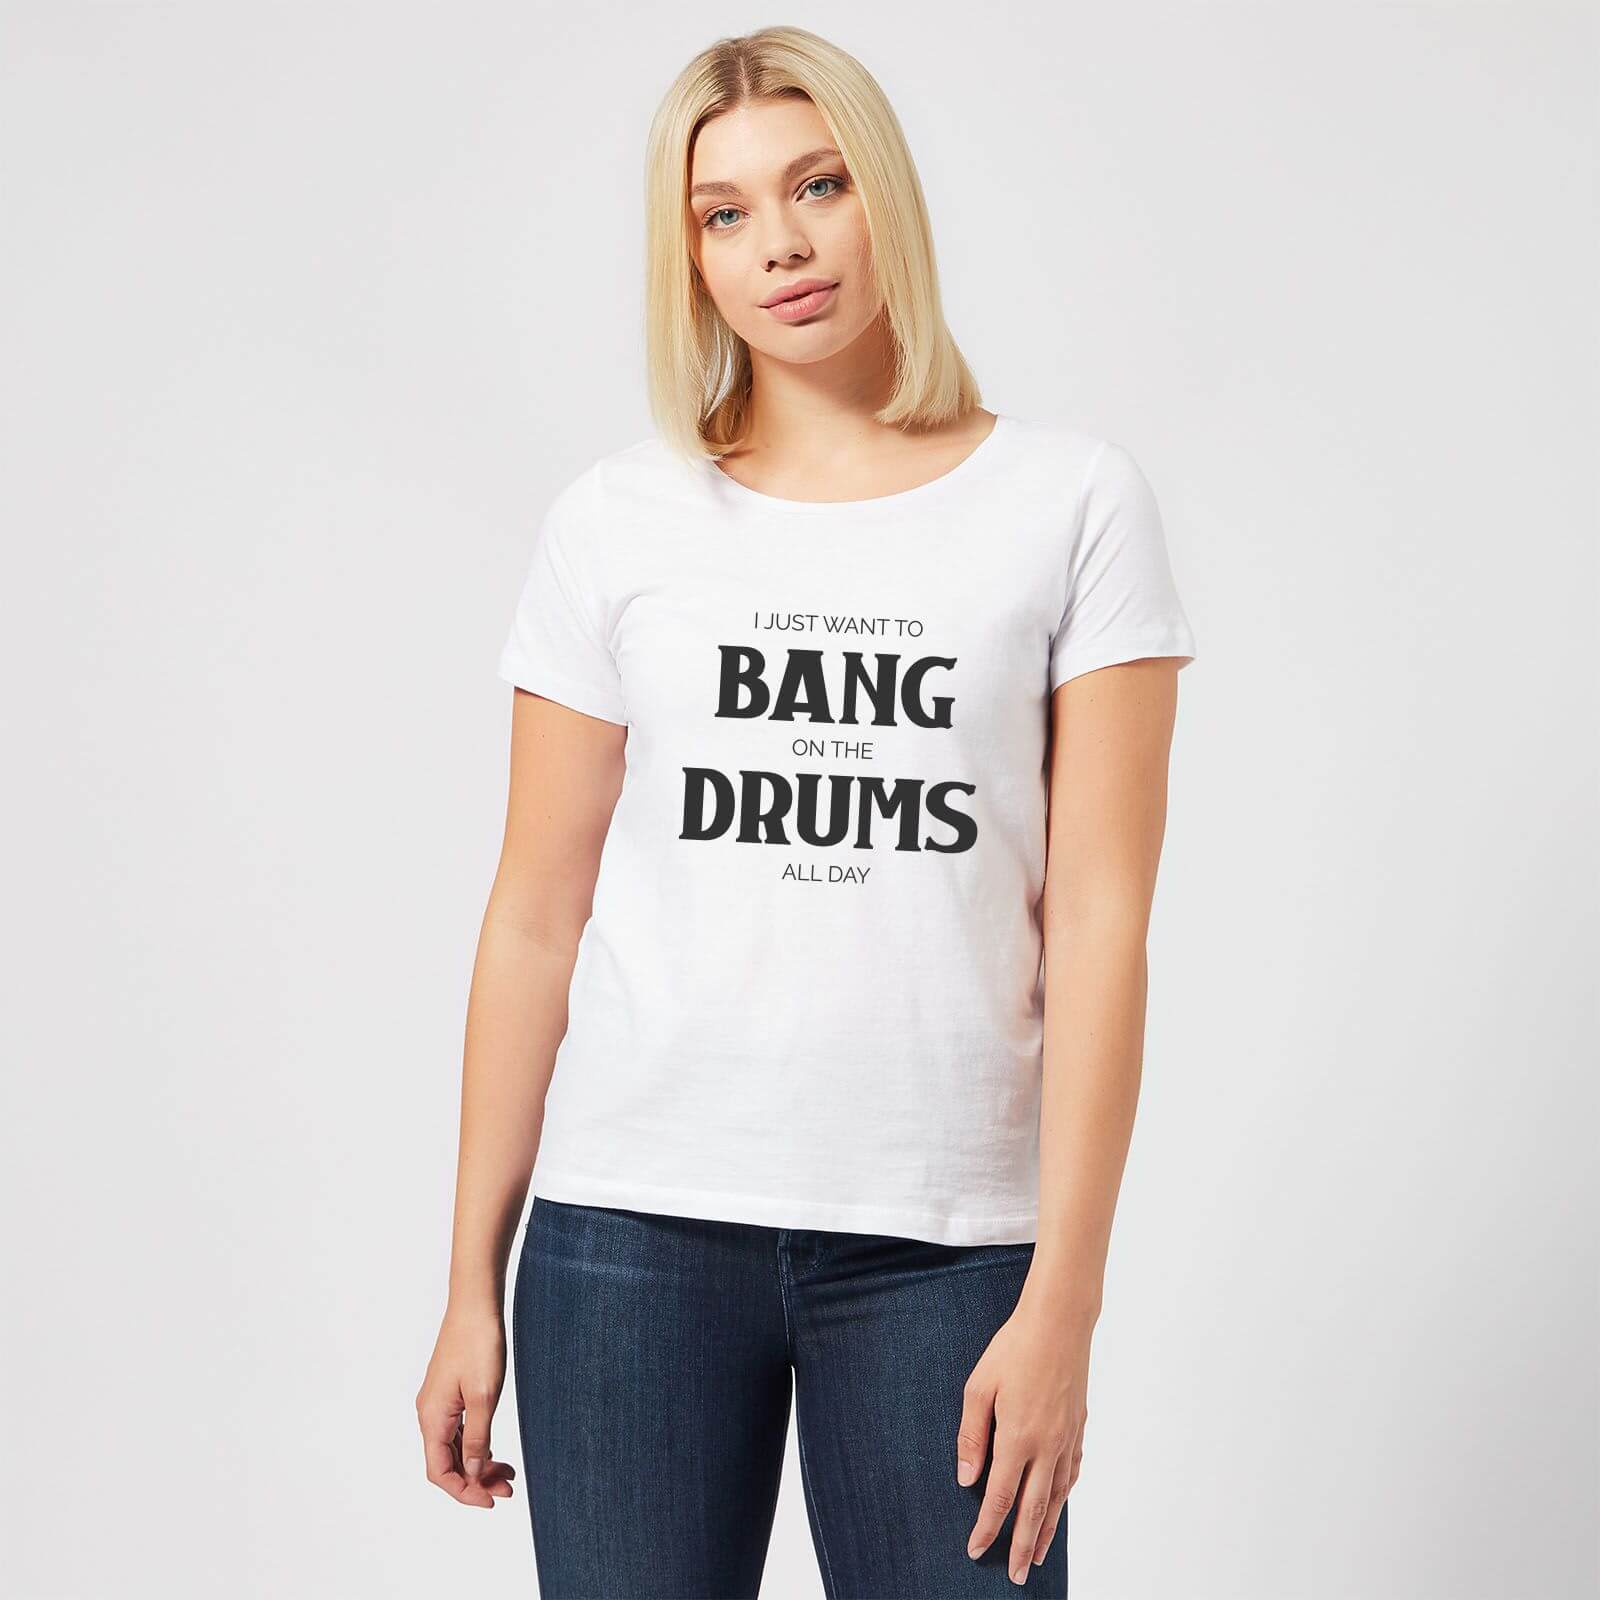 I Just Want To Bang On The Drums All Day Women's T-Shirt - White - 3XL - White